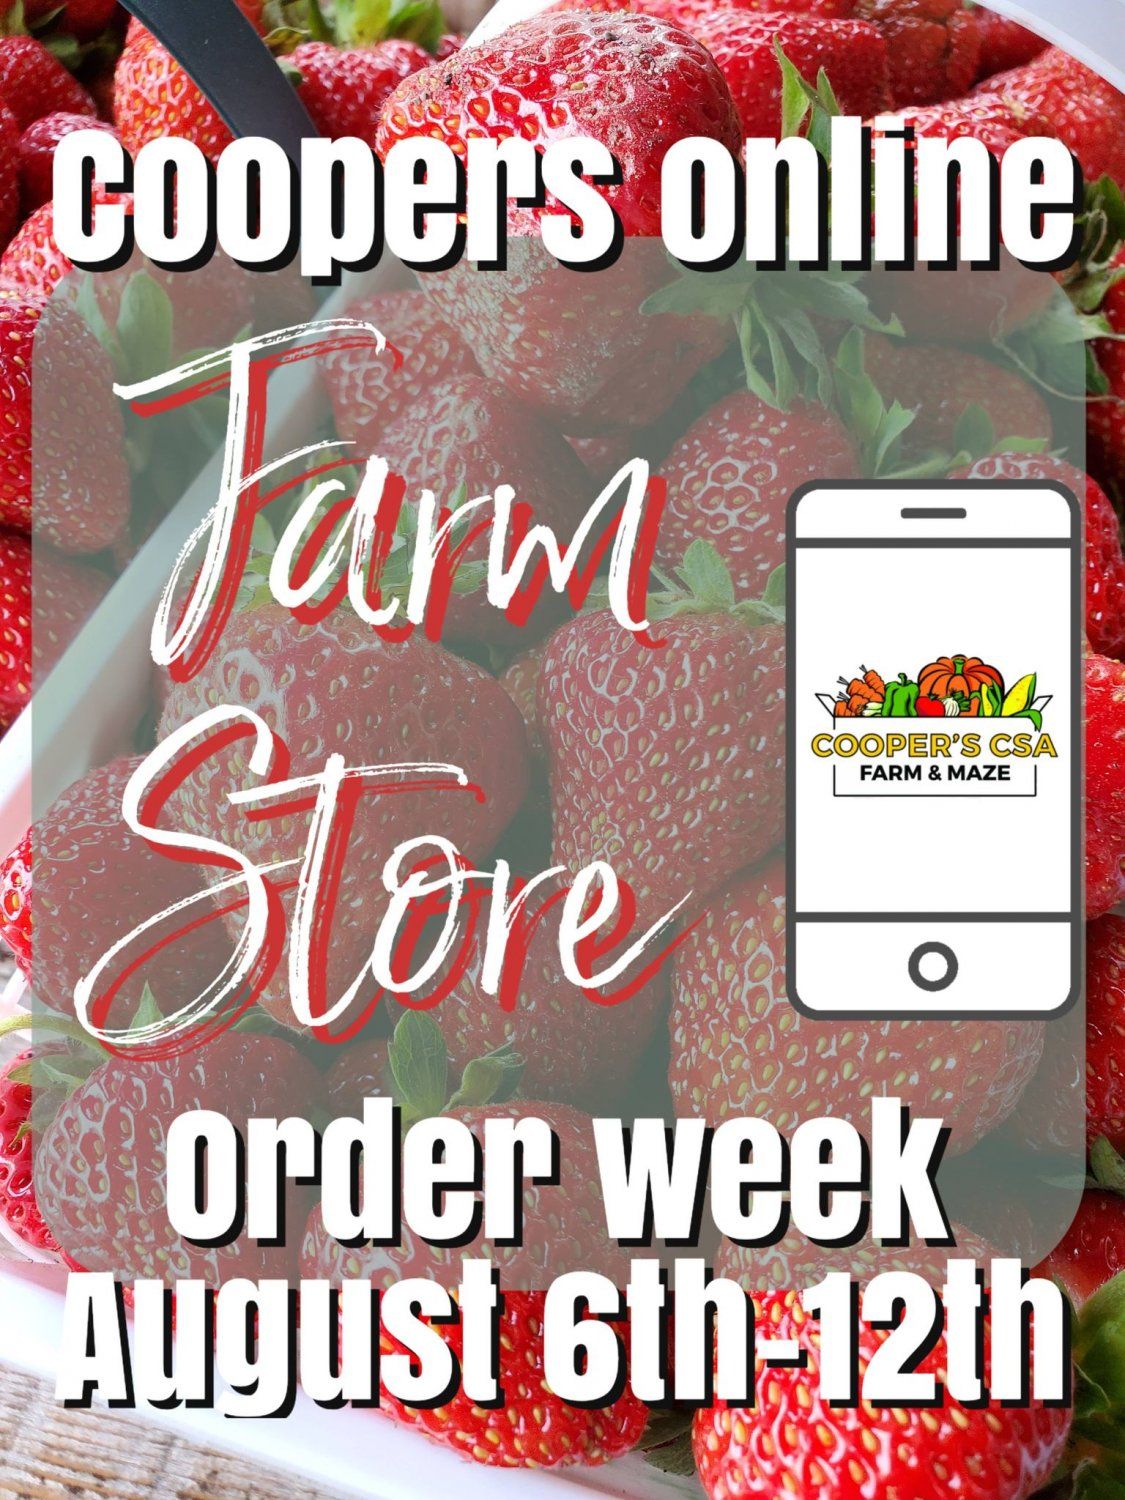 Next Happening: Coopers Online Farm Stand-Order Week August 6th-12th